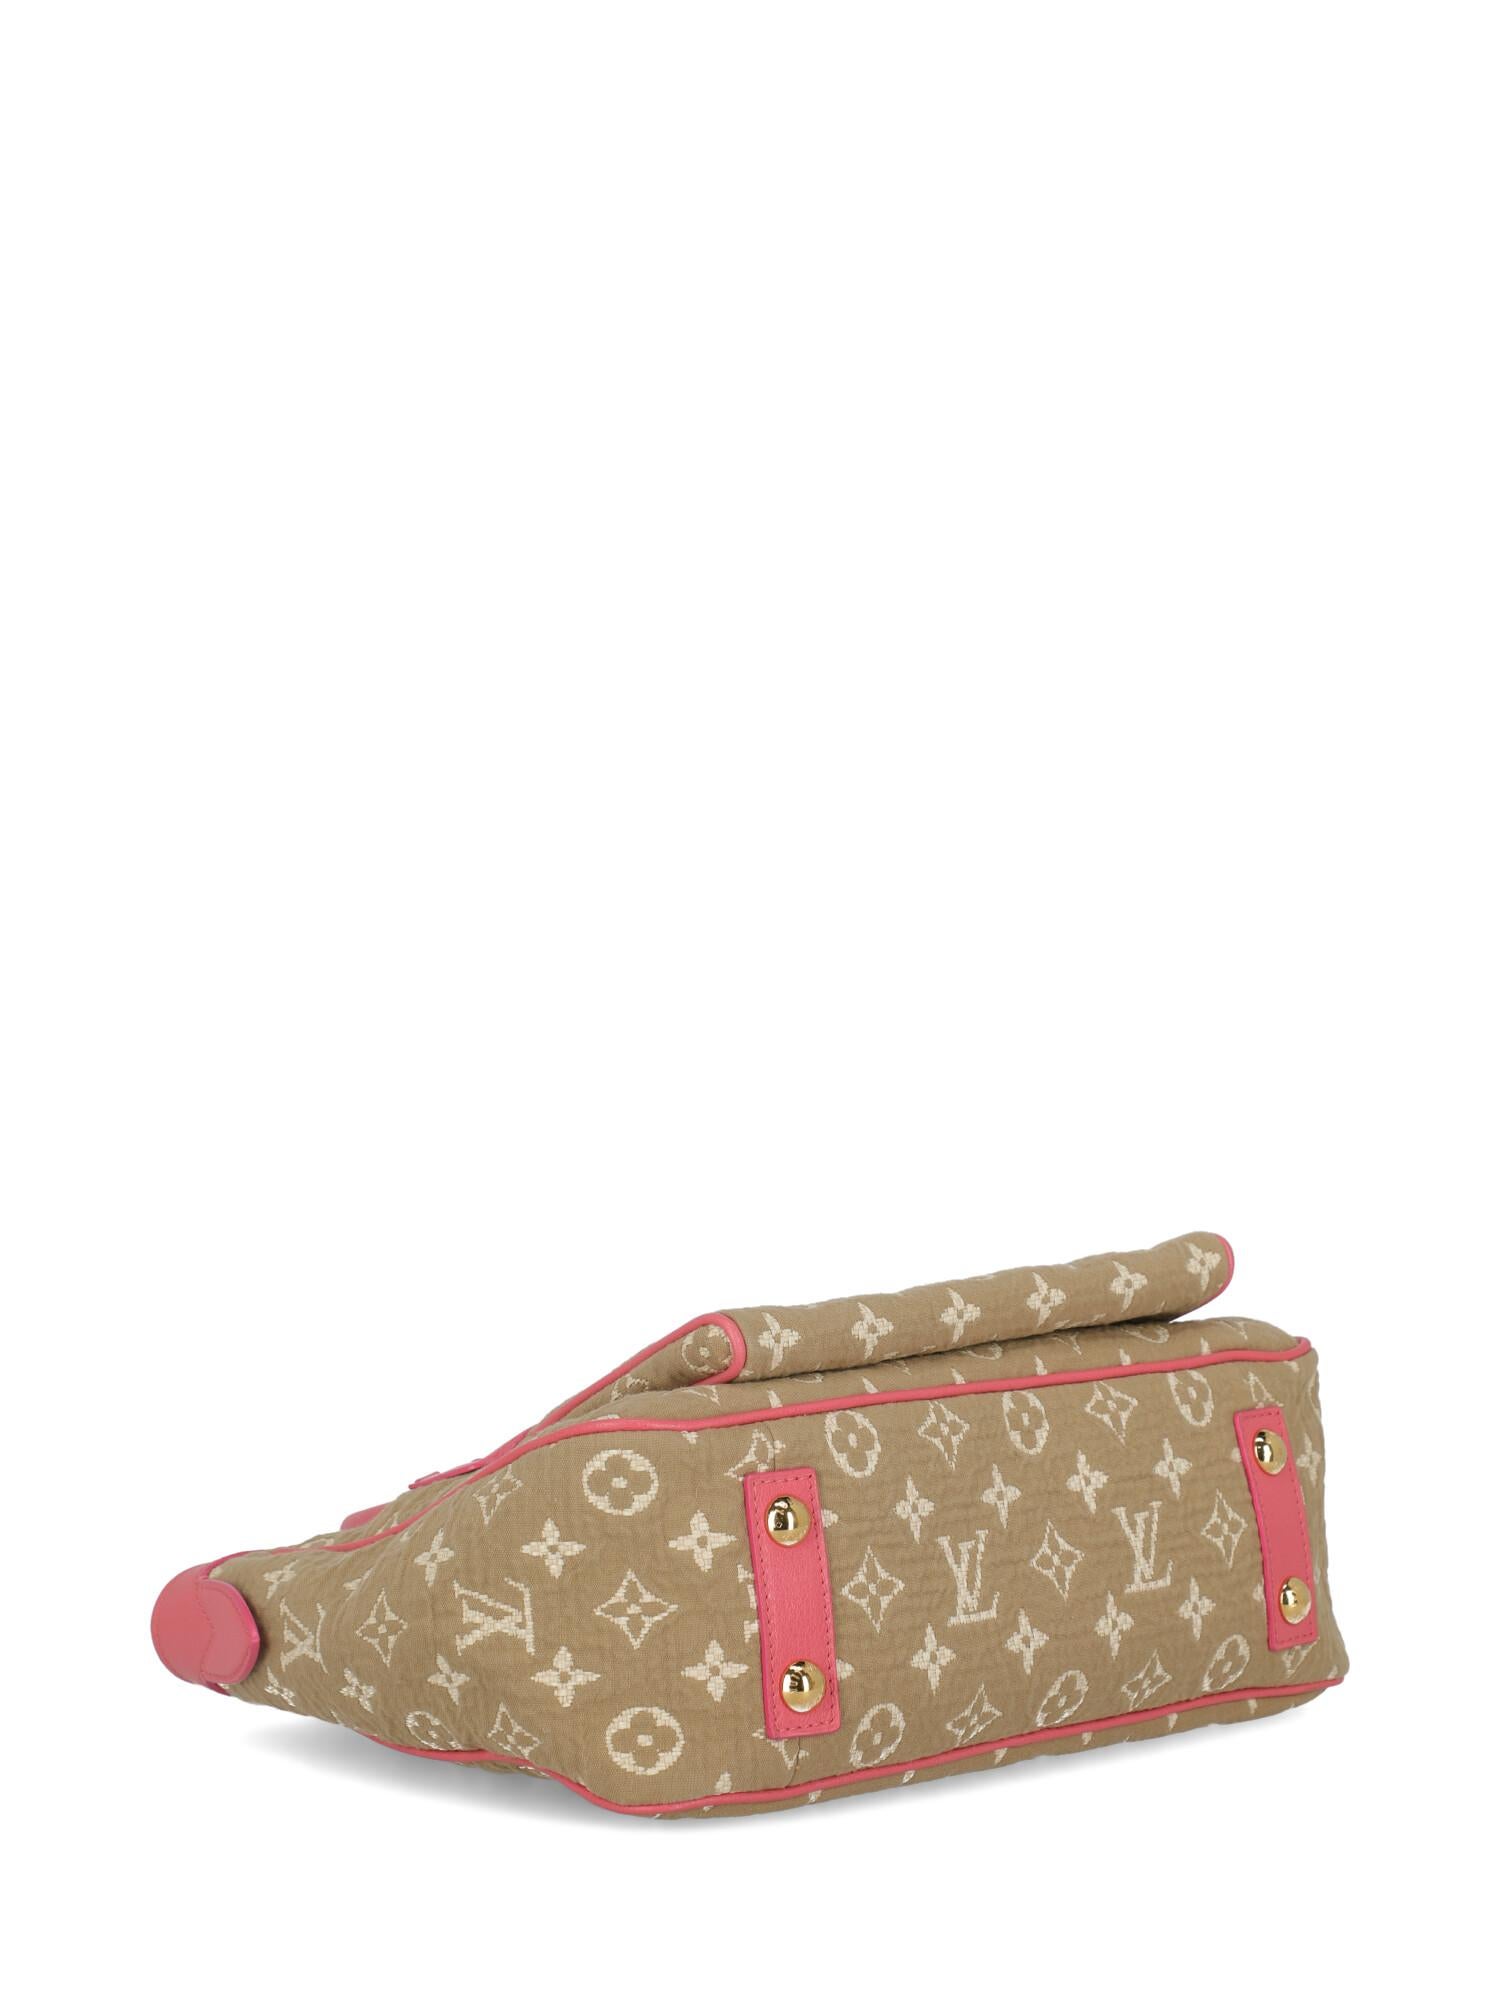 pink and white louis vuitton bag